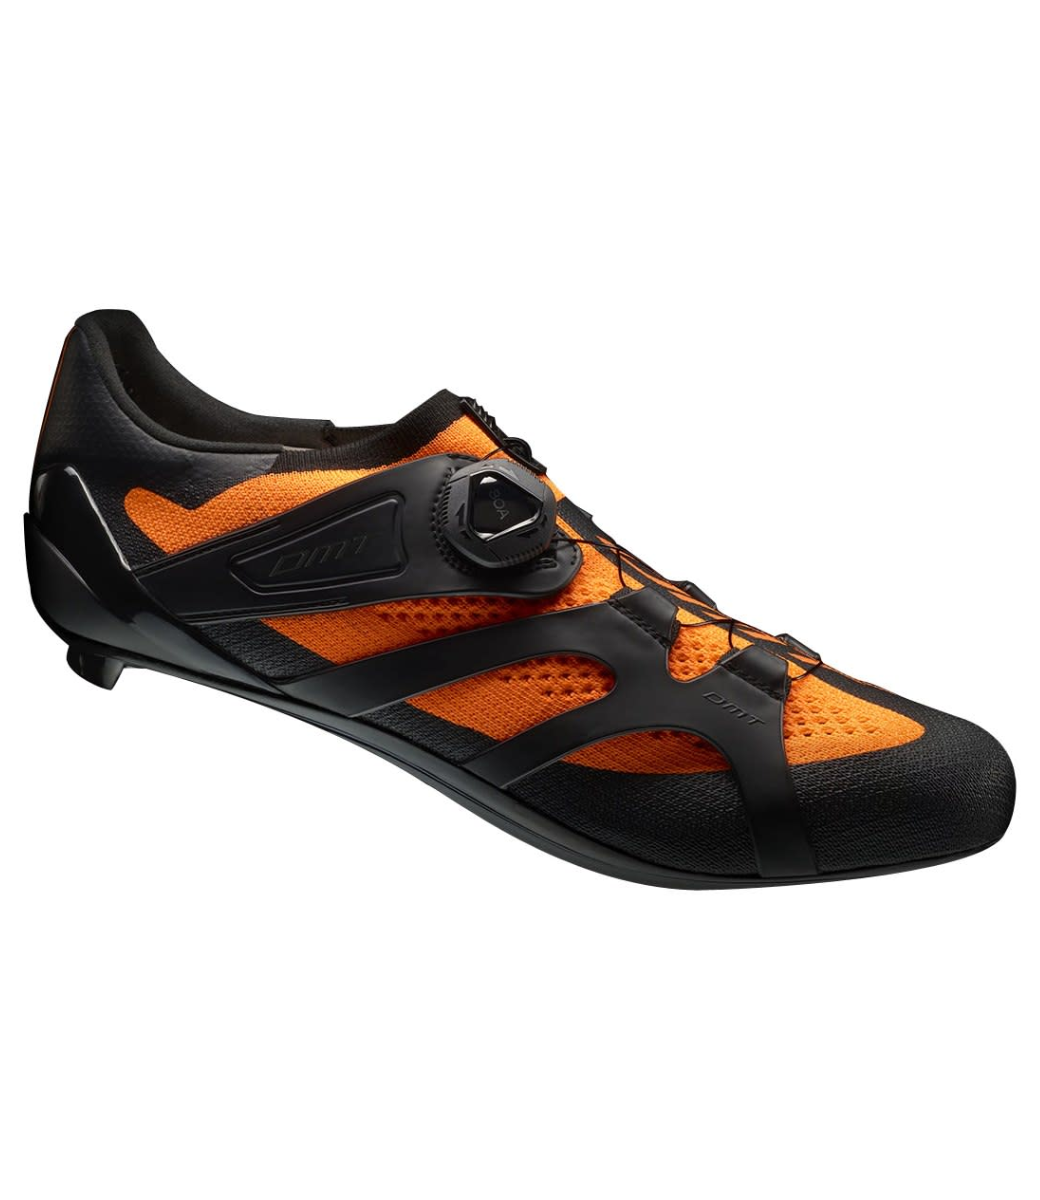 DMT KR2 Road Cycling Shoes